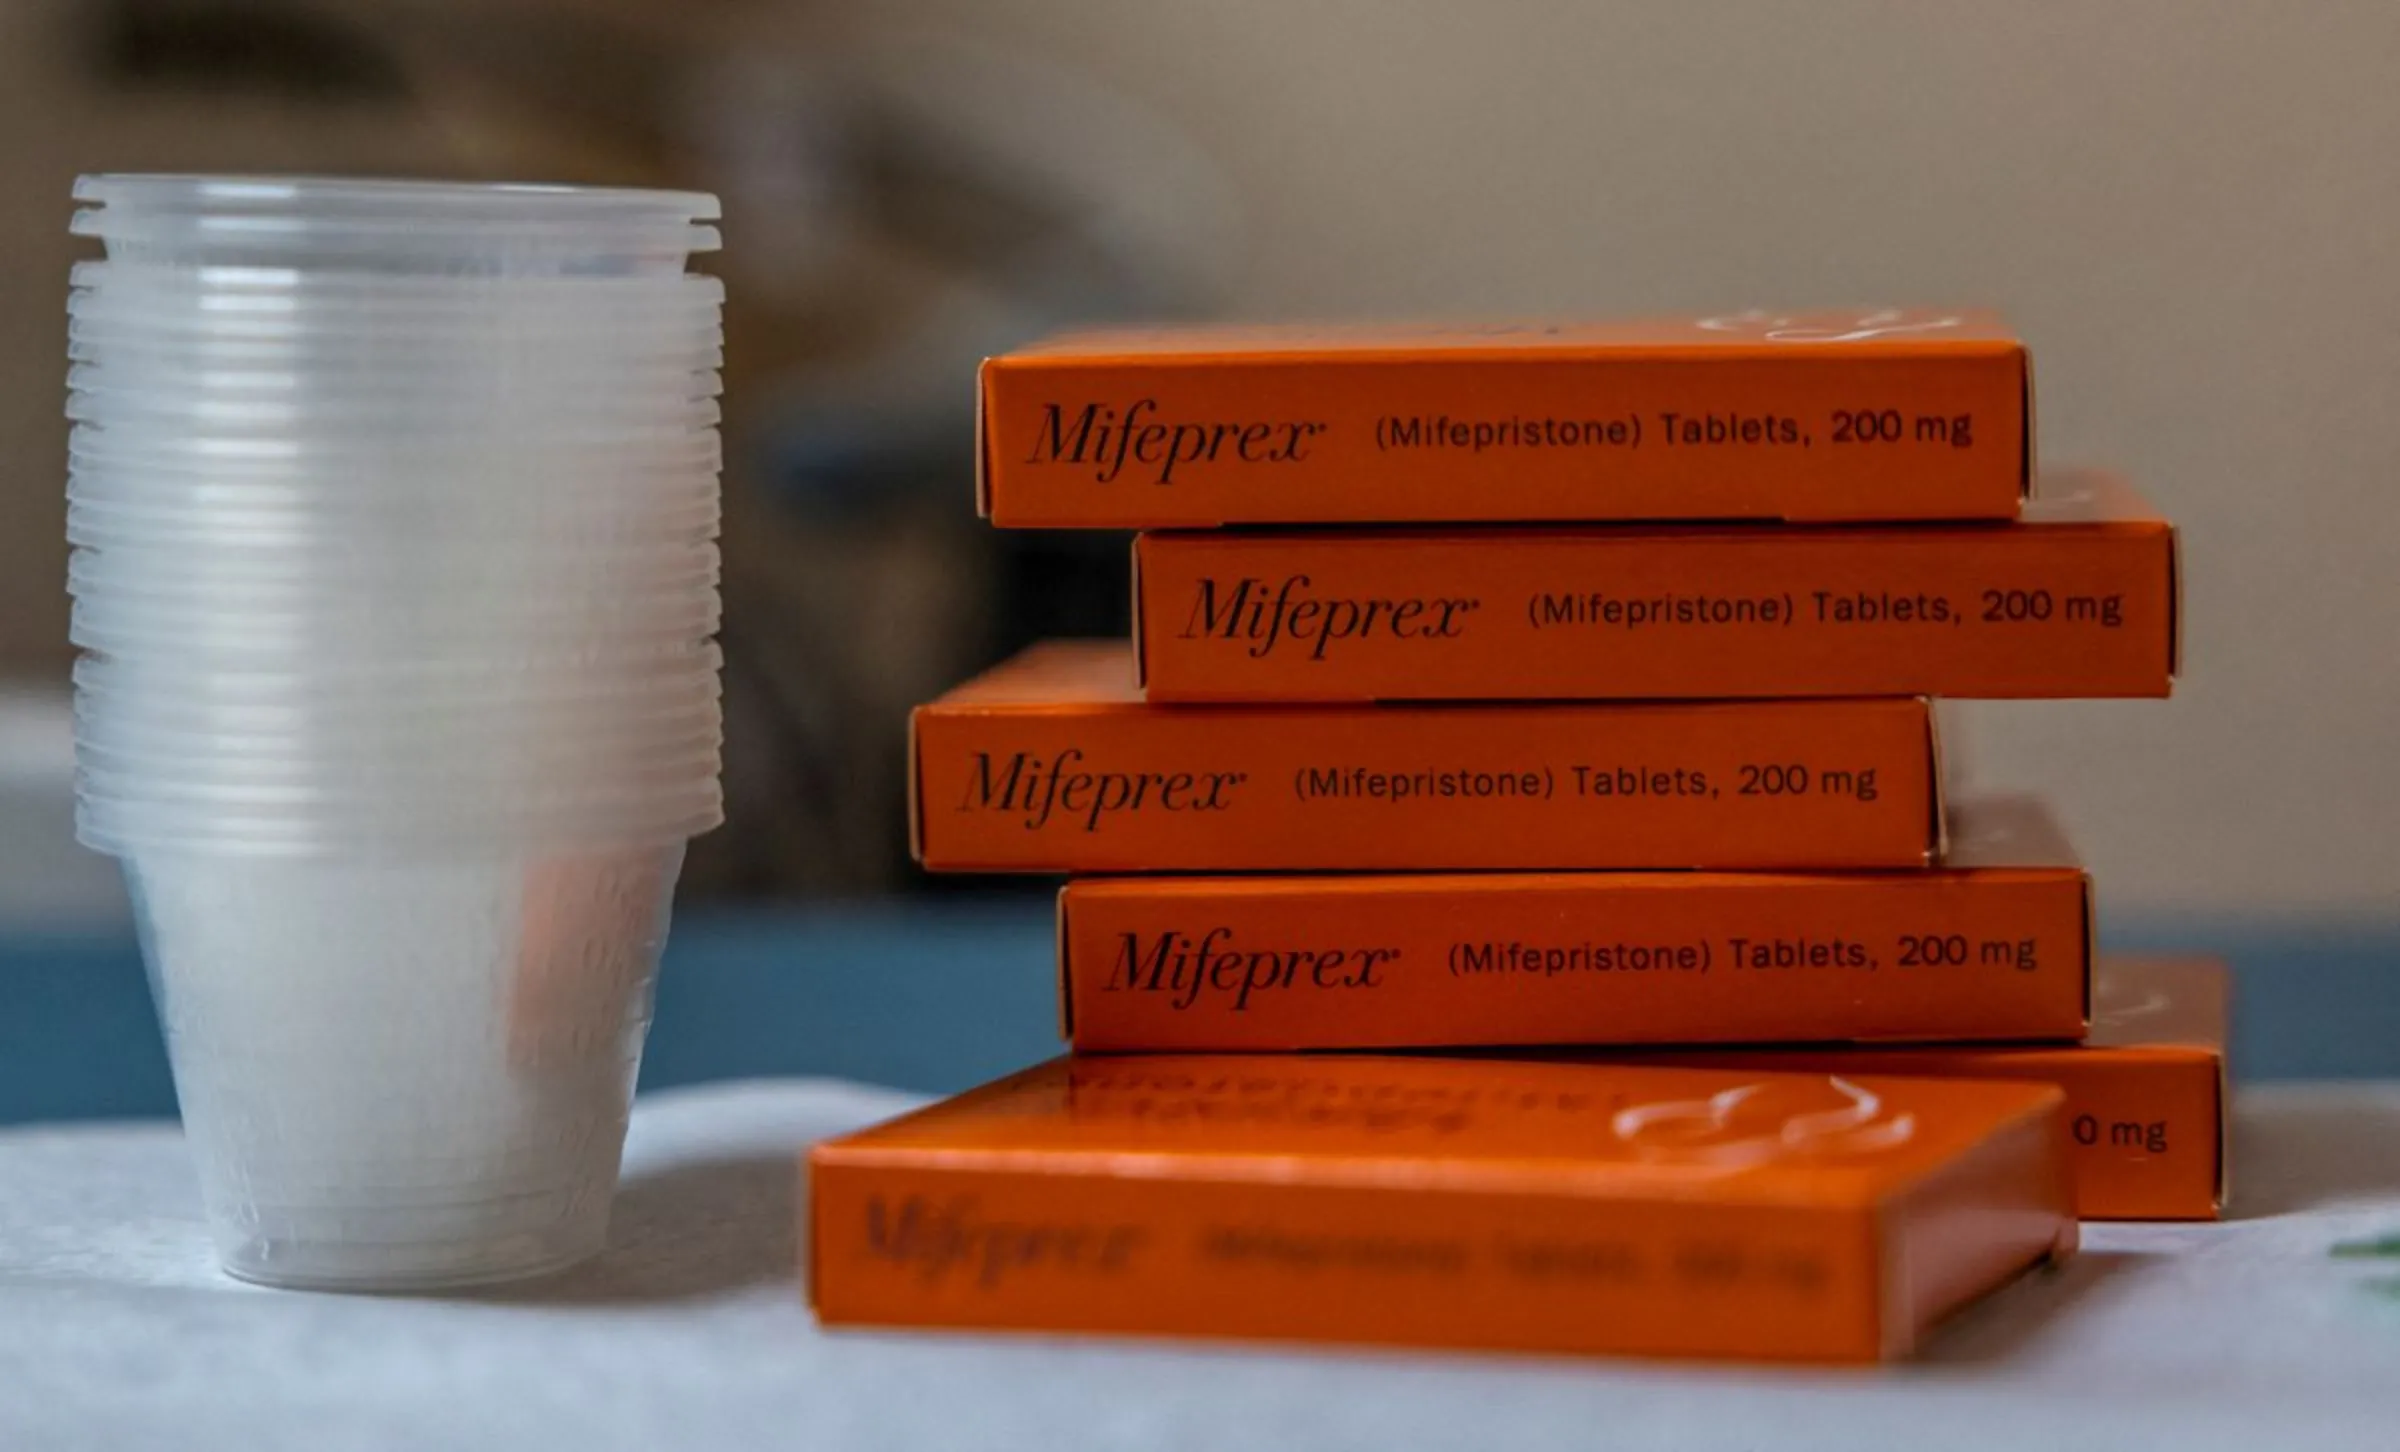 Boxes of mifepristone, the first pill given in a medical abortion, are prepared for patients at Women's Reproductive Clinic of New Mexico in Santa Teresa, U.S., January 13, 2023. REUTERS/Evelyn Hockstein